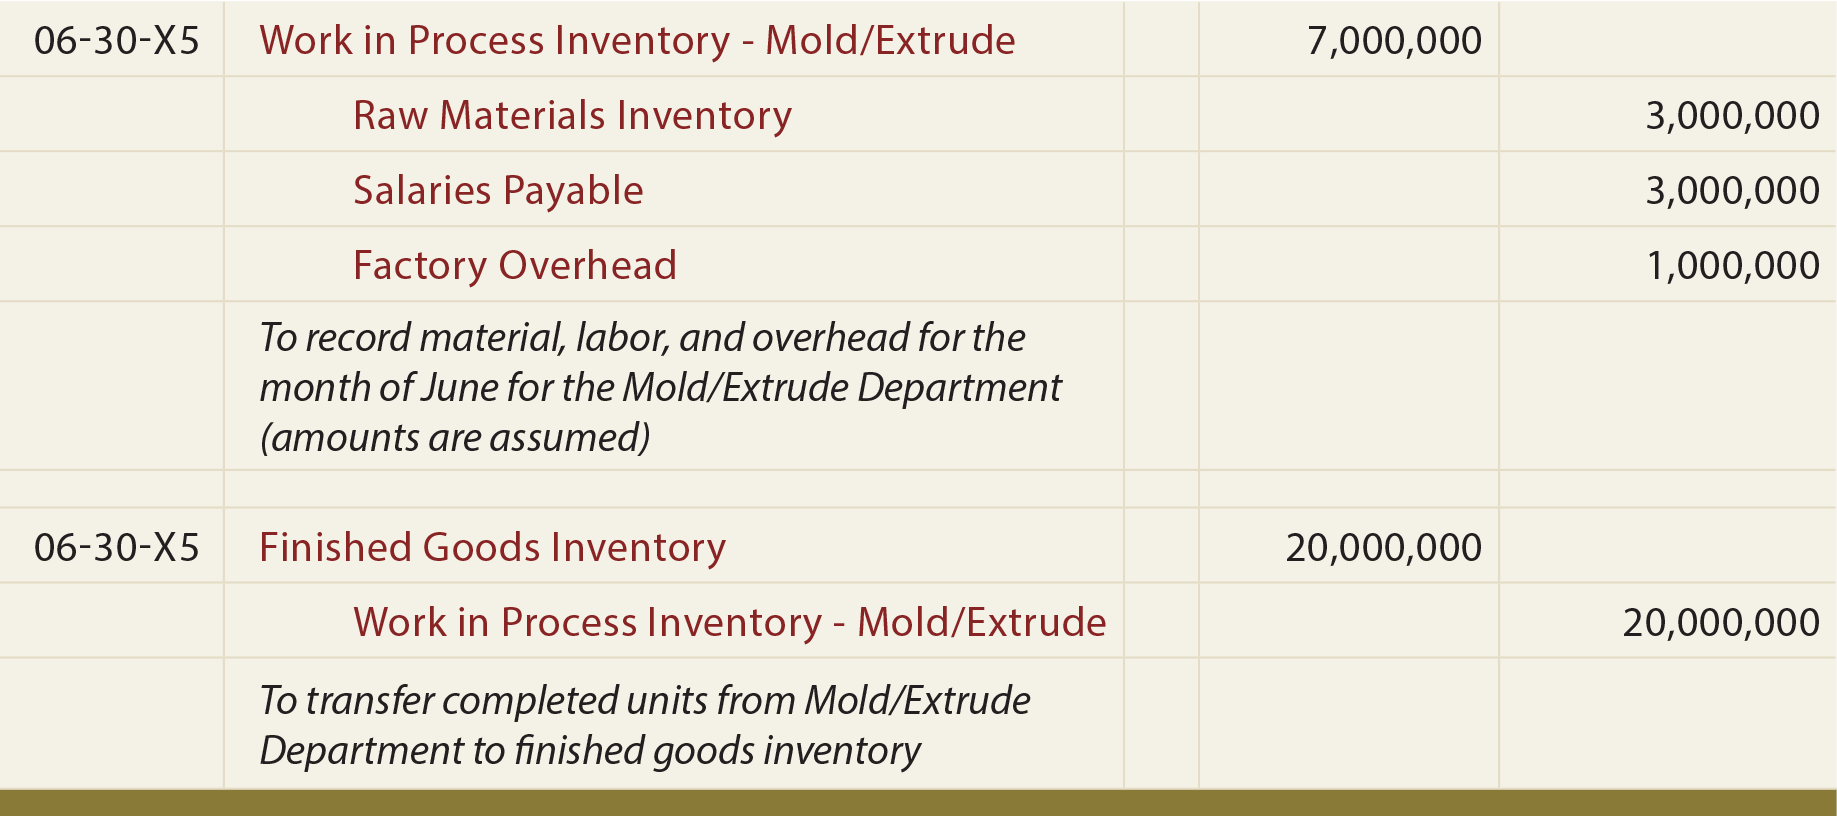 Mold/Extrude Department Journal Entries